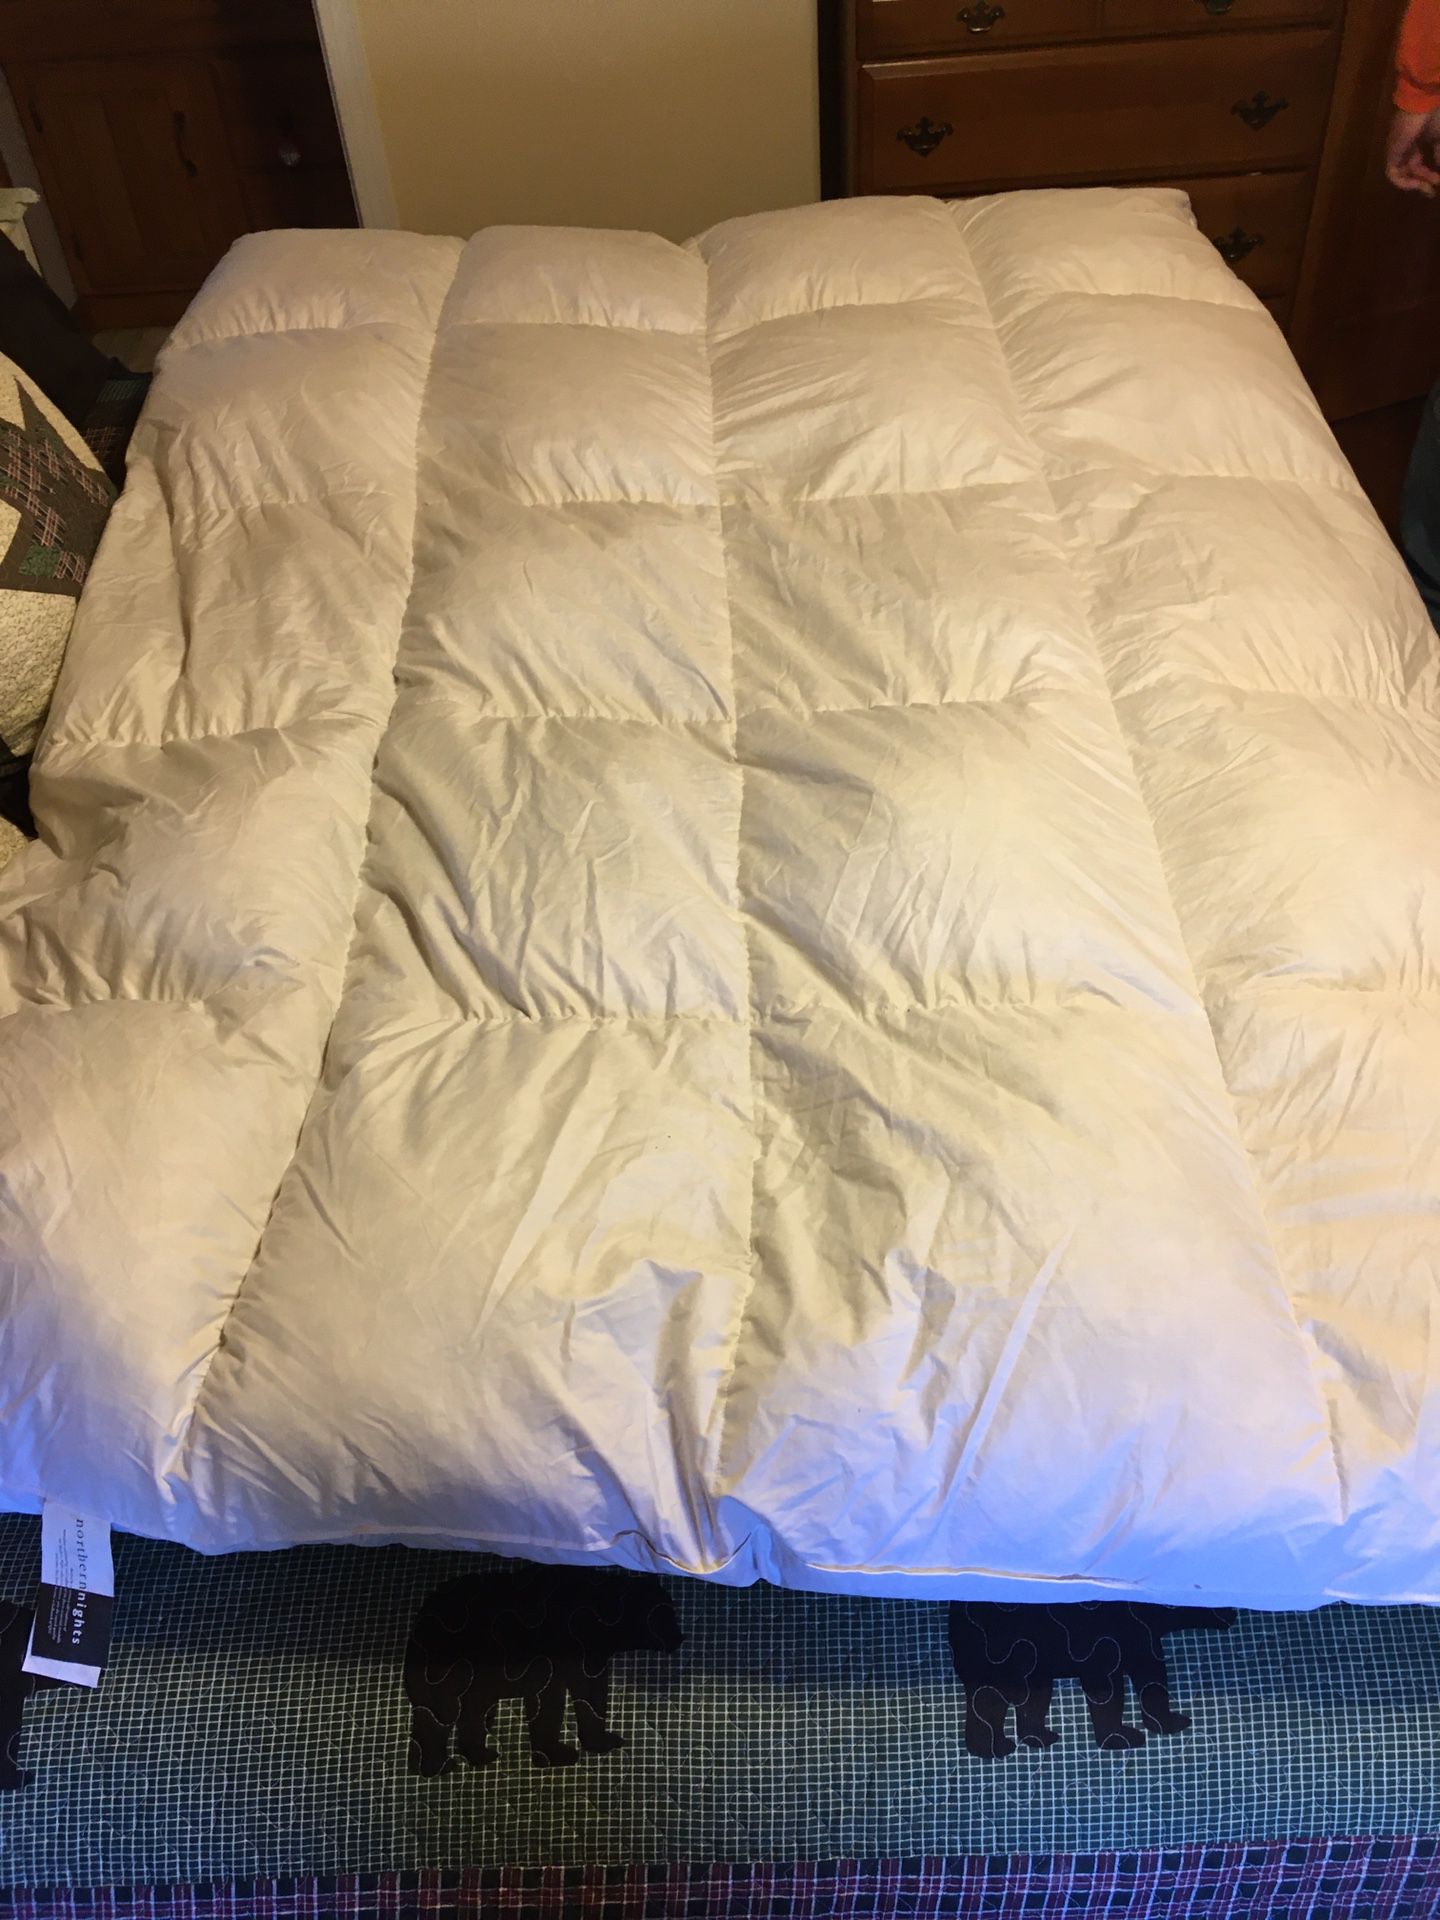 Full size down feather mattress topper. Like new only used a couple of times. Paid $100 but asking $40